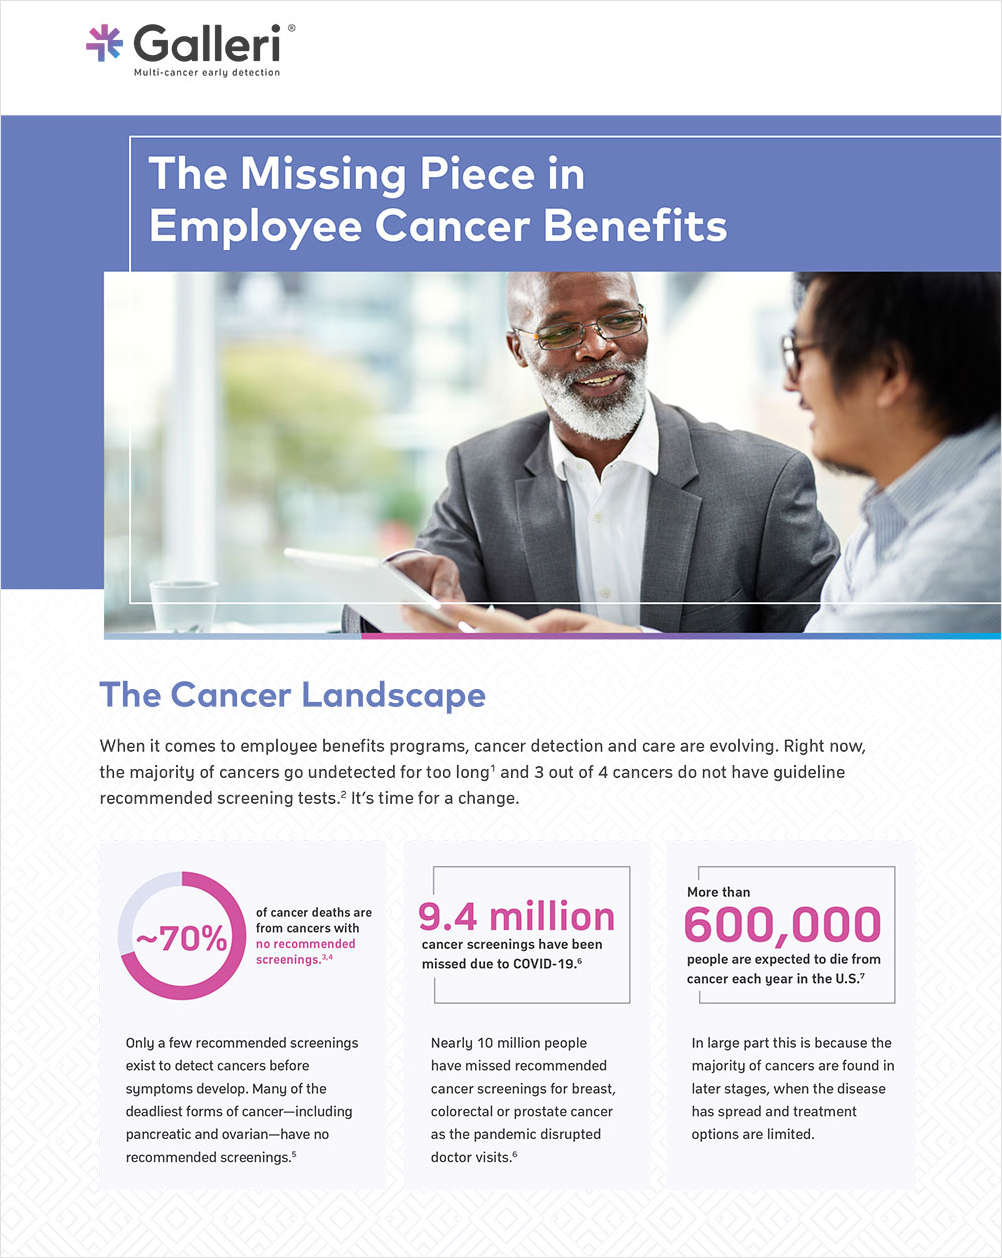 The Missing Piece in Employee Cancer Benefits